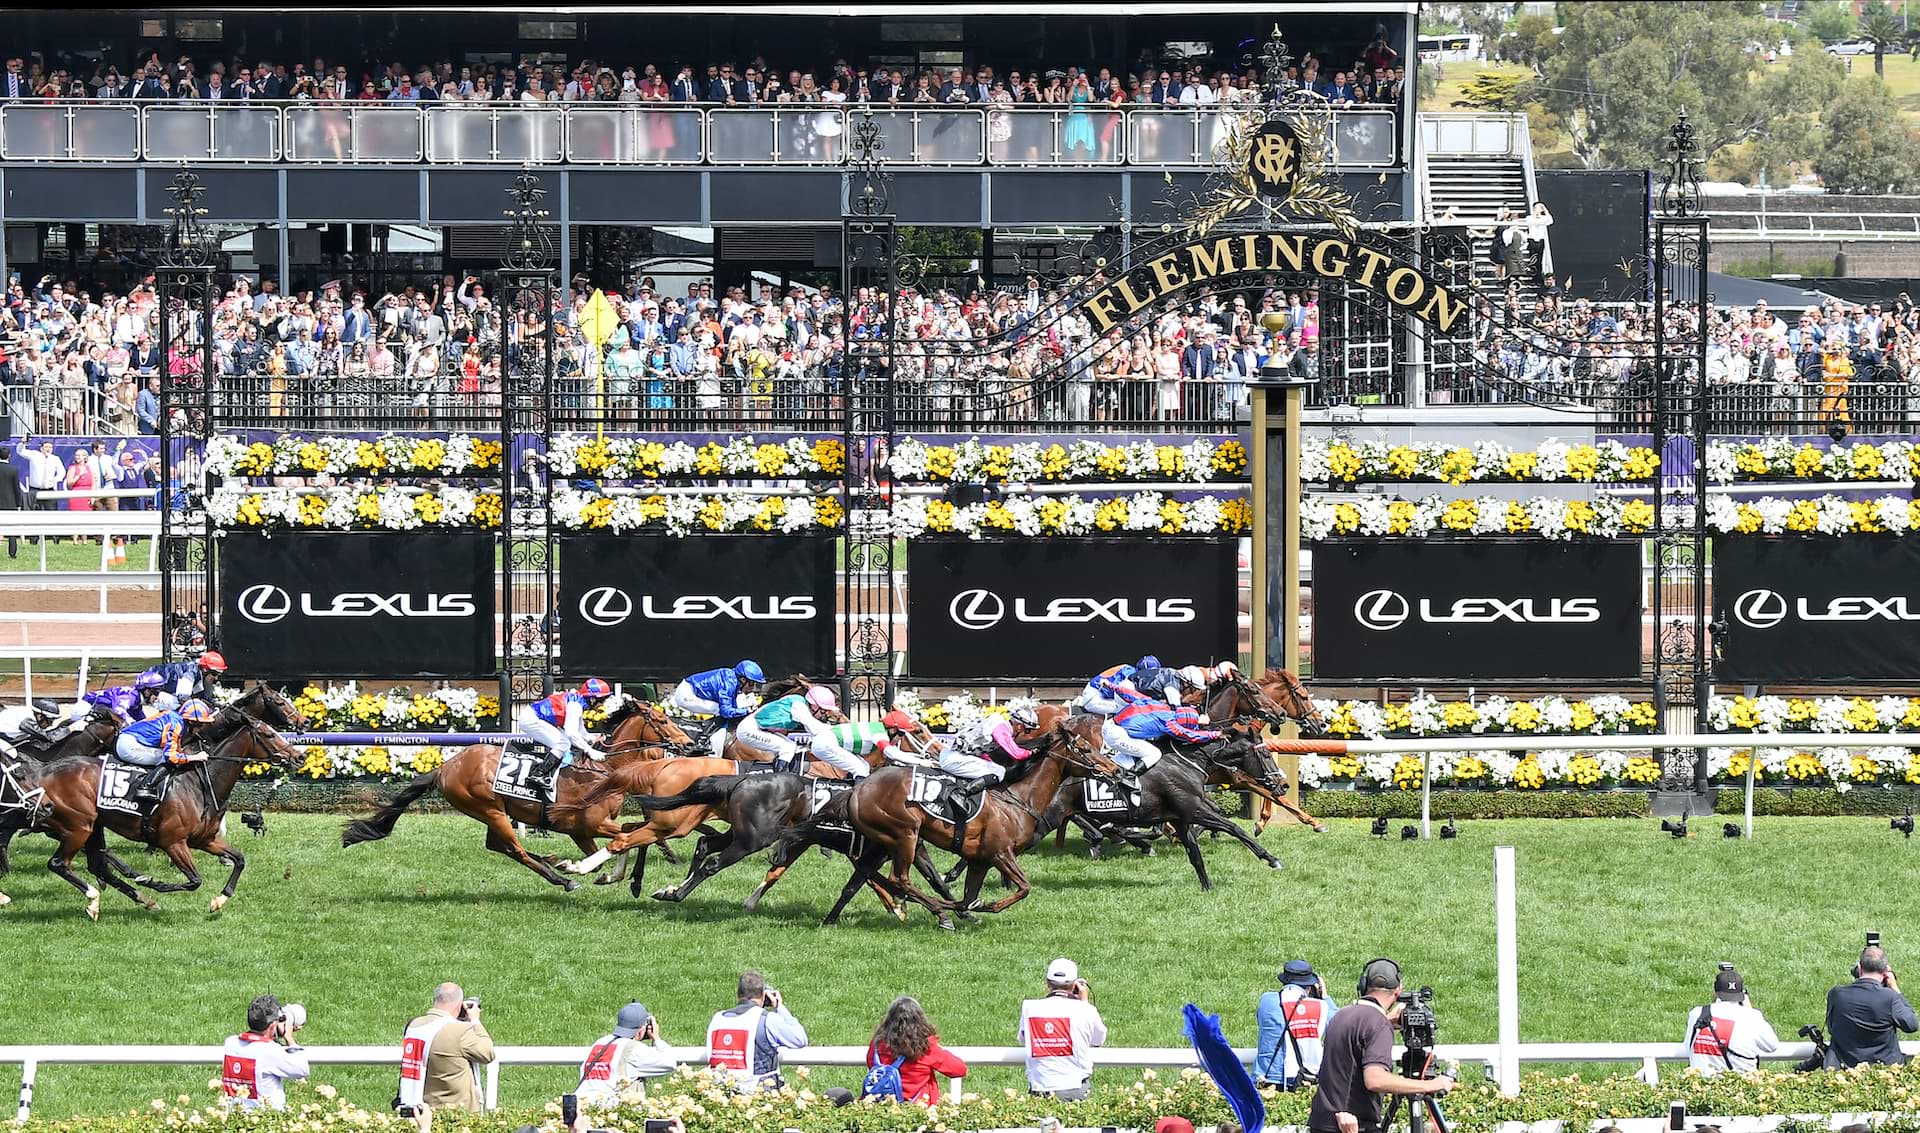 Australian thoroughbred wins the 2019 Lexus Melbourne Cup